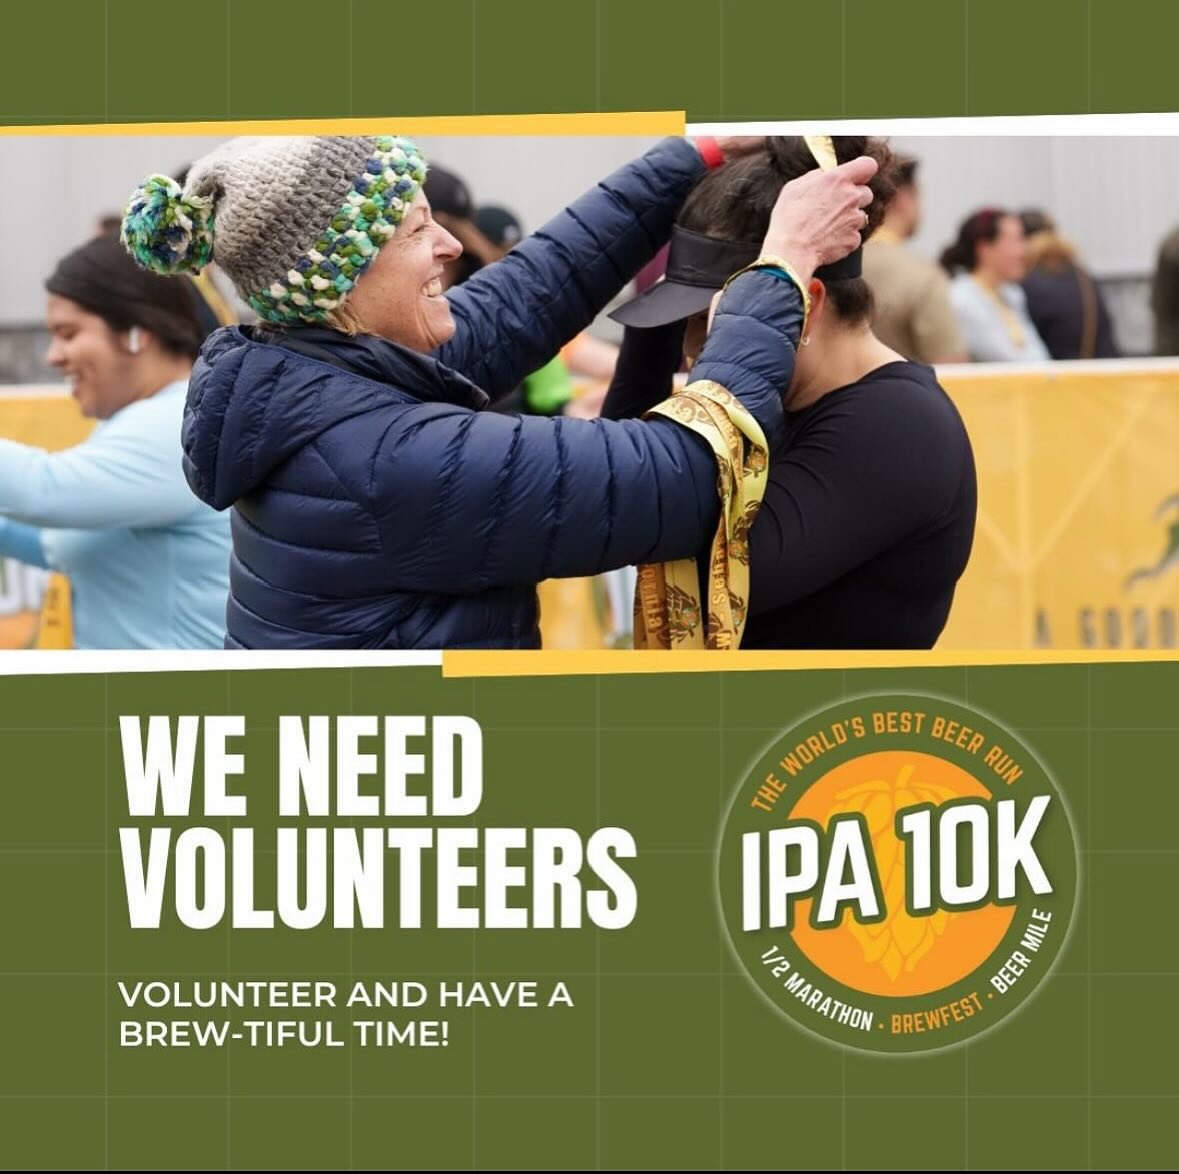 🚨🚨🚨🚨WE NEED MORE VOLUNTEERS🚨🚨🚨.
.
.
 Sign up now! Earn some money for your organization or a complimentary ticket to the Brewfest to enjoy the festivities!! 💪✨ #VolunteerWithUs EMAIL RUNIPA10K@Gmail.com 

#MakeADifference&rdquo;